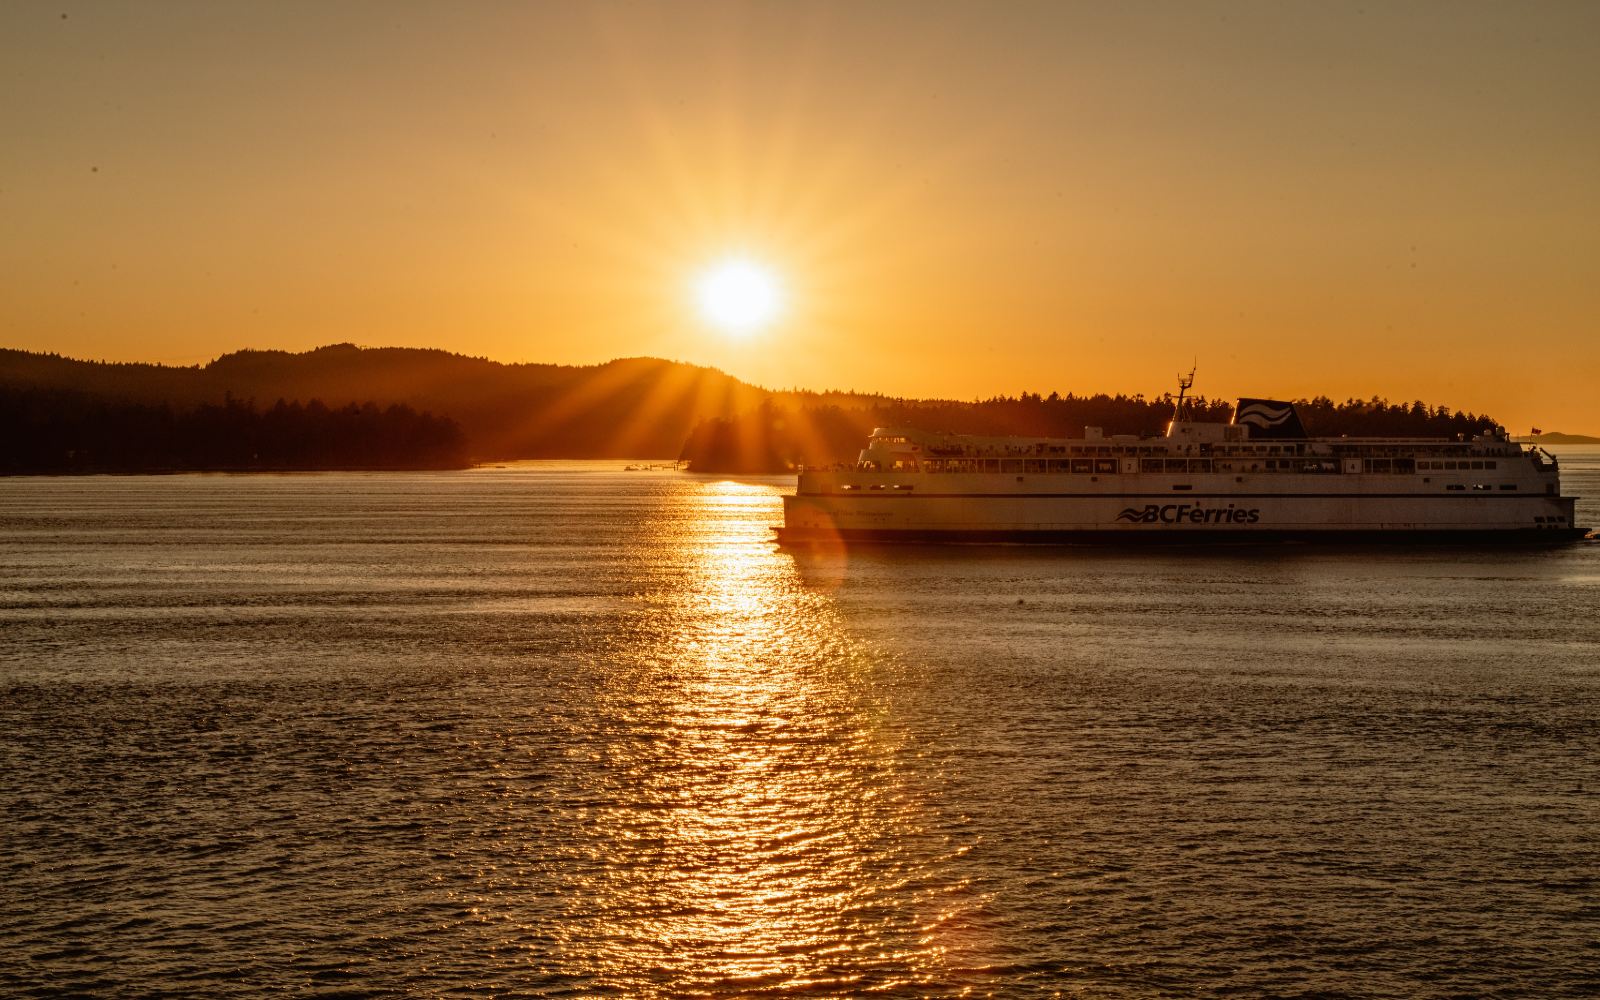 A BC Ferry travels from Vancouver to Victoria